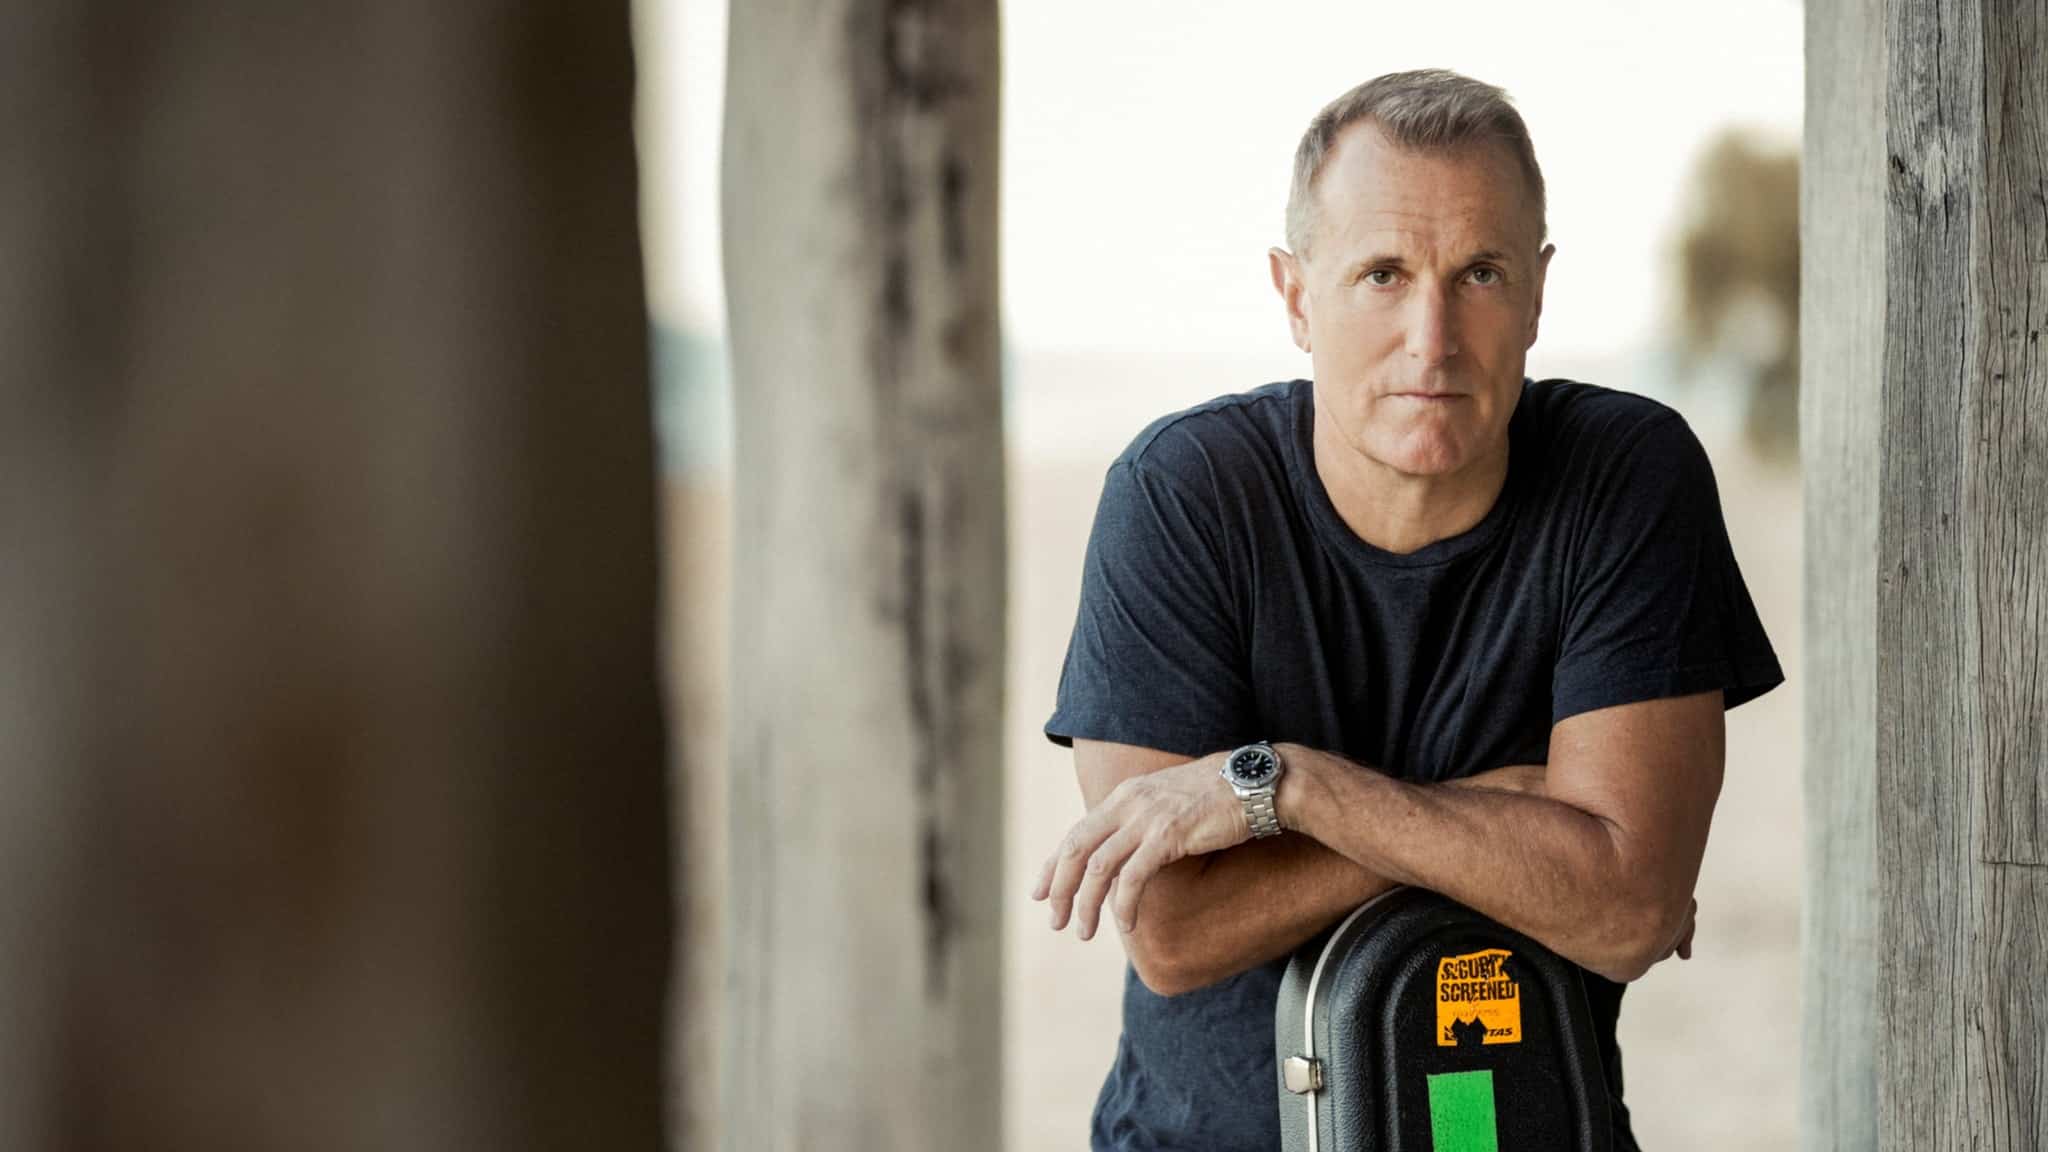 James reyne leaning on his guitar case